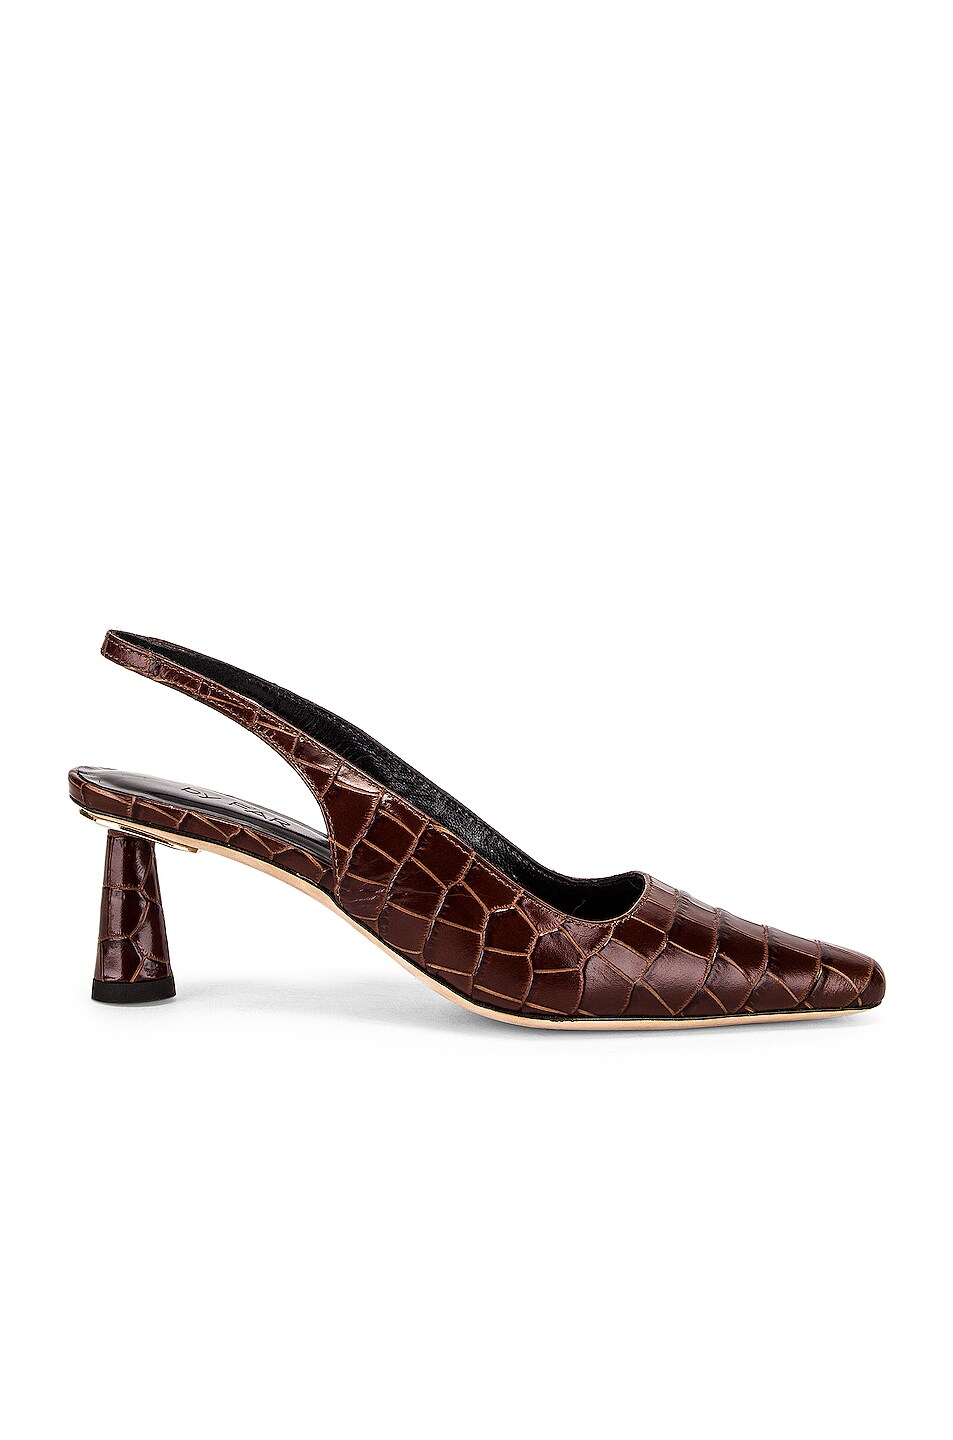 Image 1 of BY FAR Diana Nutella Croco Embossed Leather Heel in Nutella